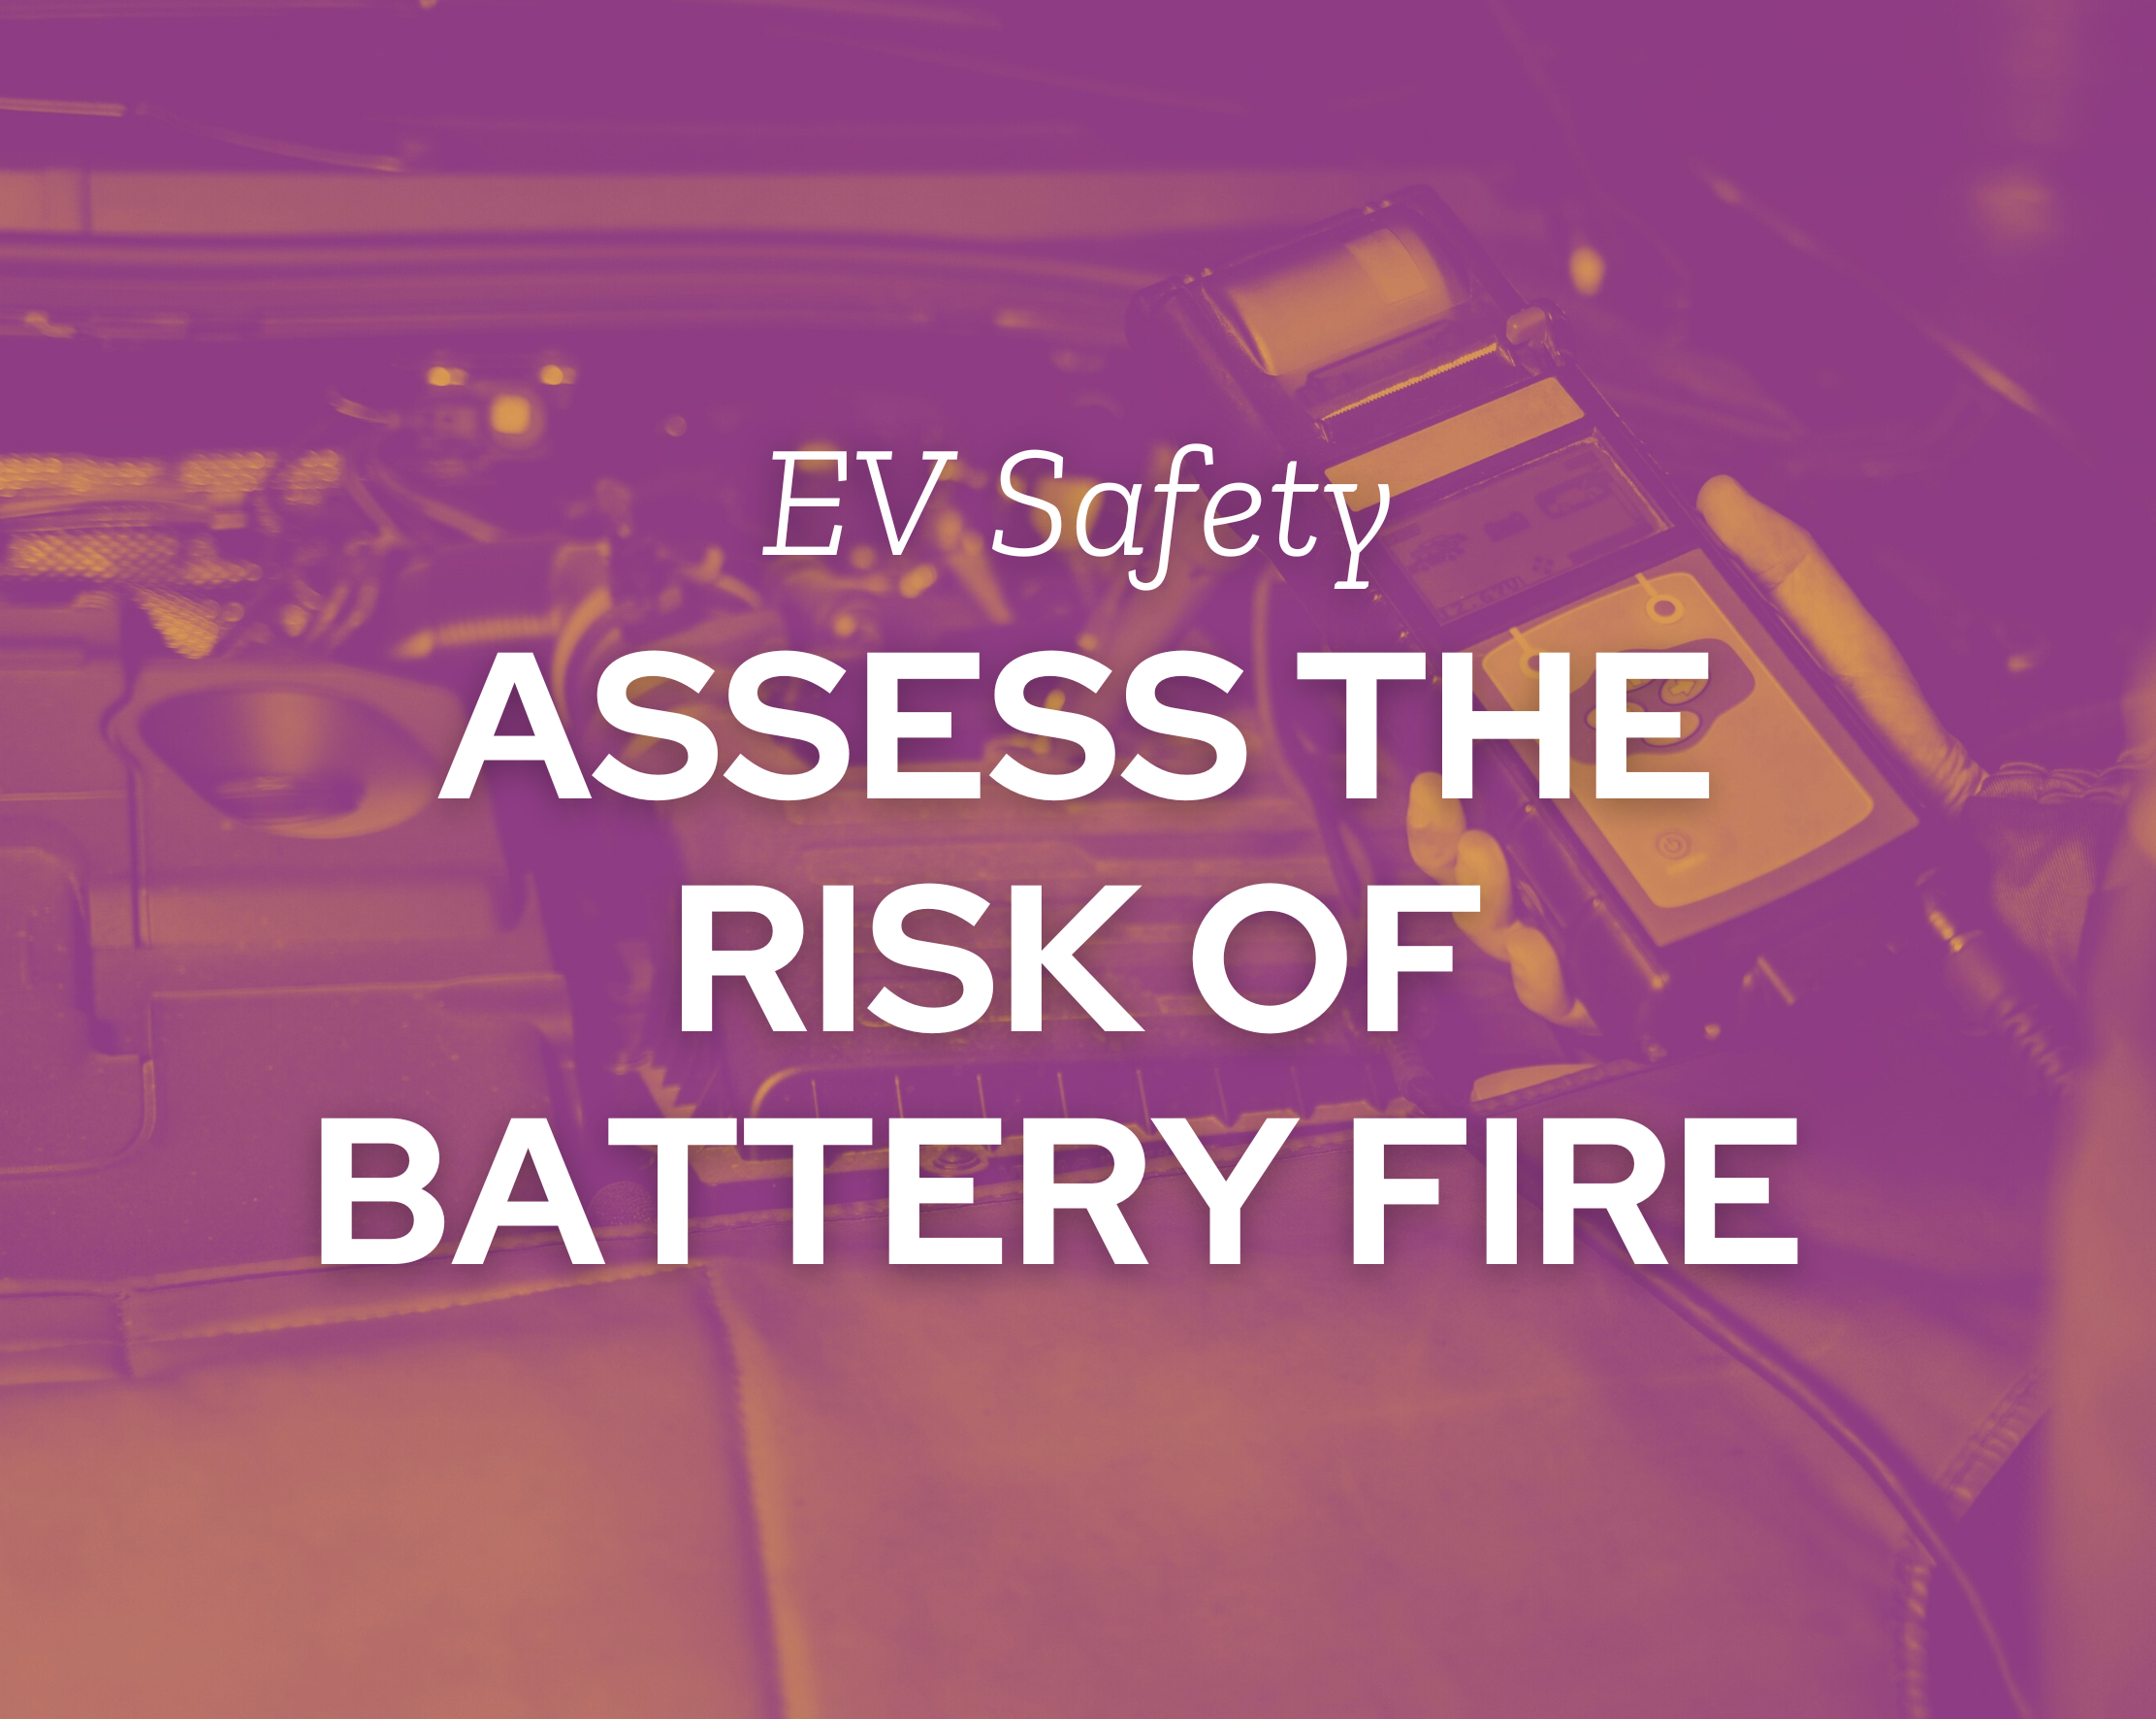 EV Hazards: How to Assess the Risk of Battery Fire Outside a Vehicle